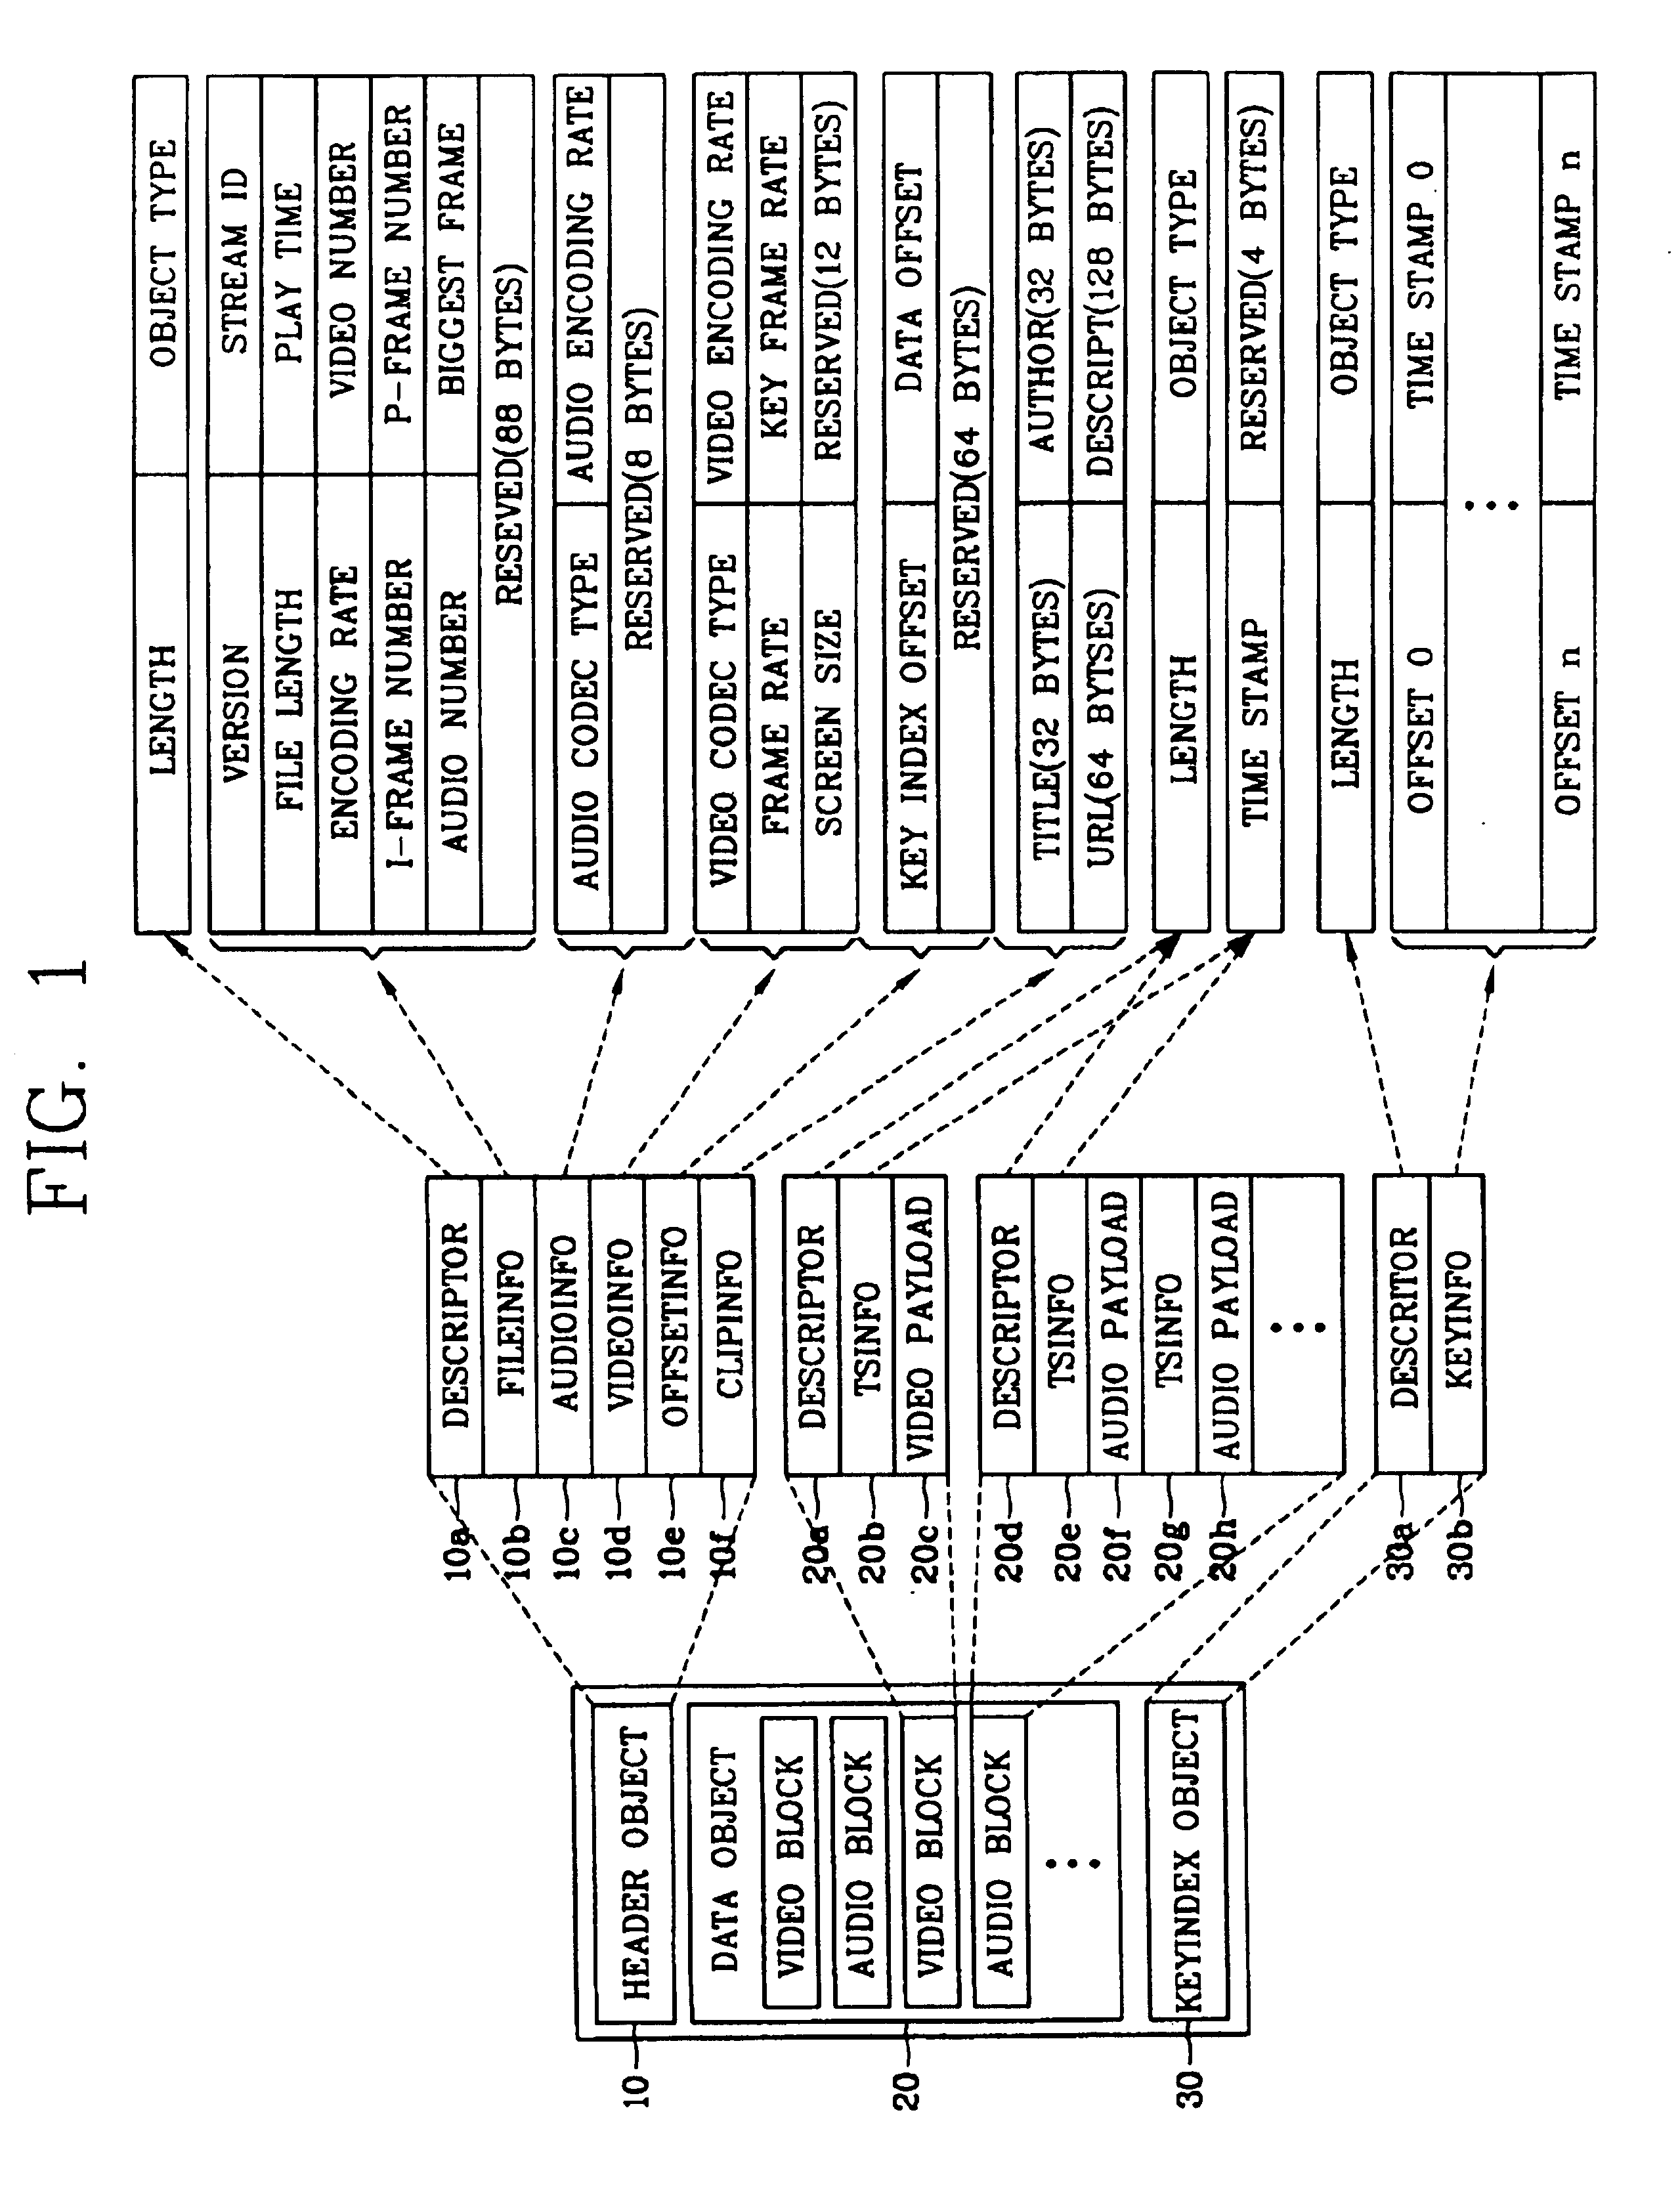 Apparatus and method for providing file structure for multimedia streaming service